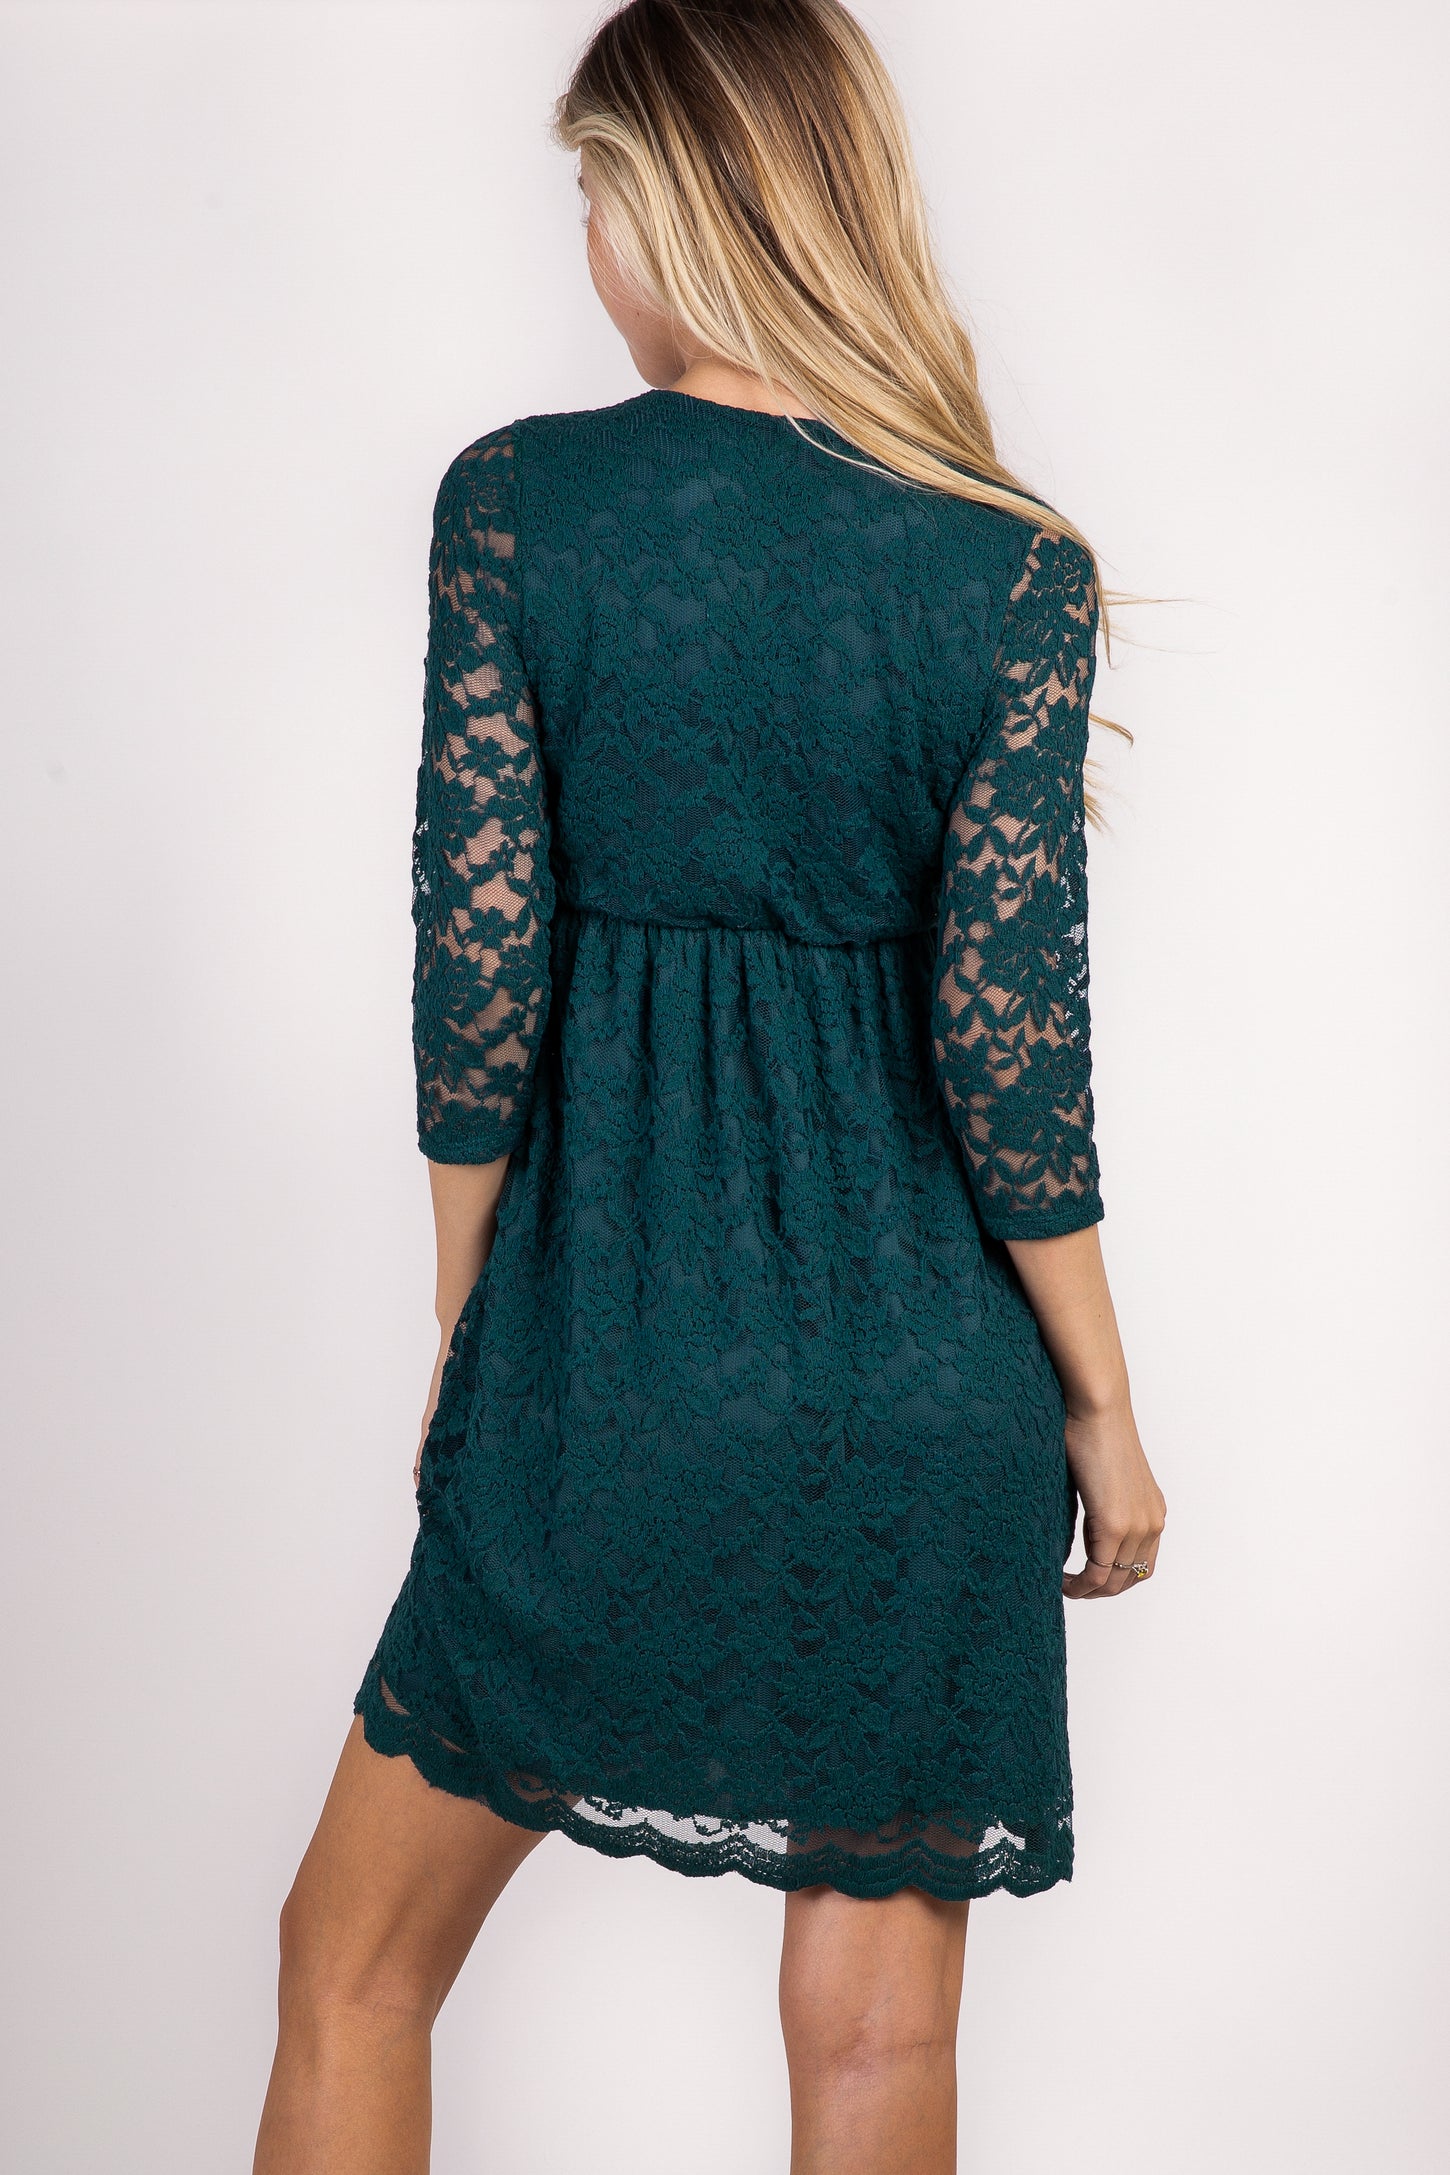 Forest Green Lace Overlay Dress– Wrap PinkBlush